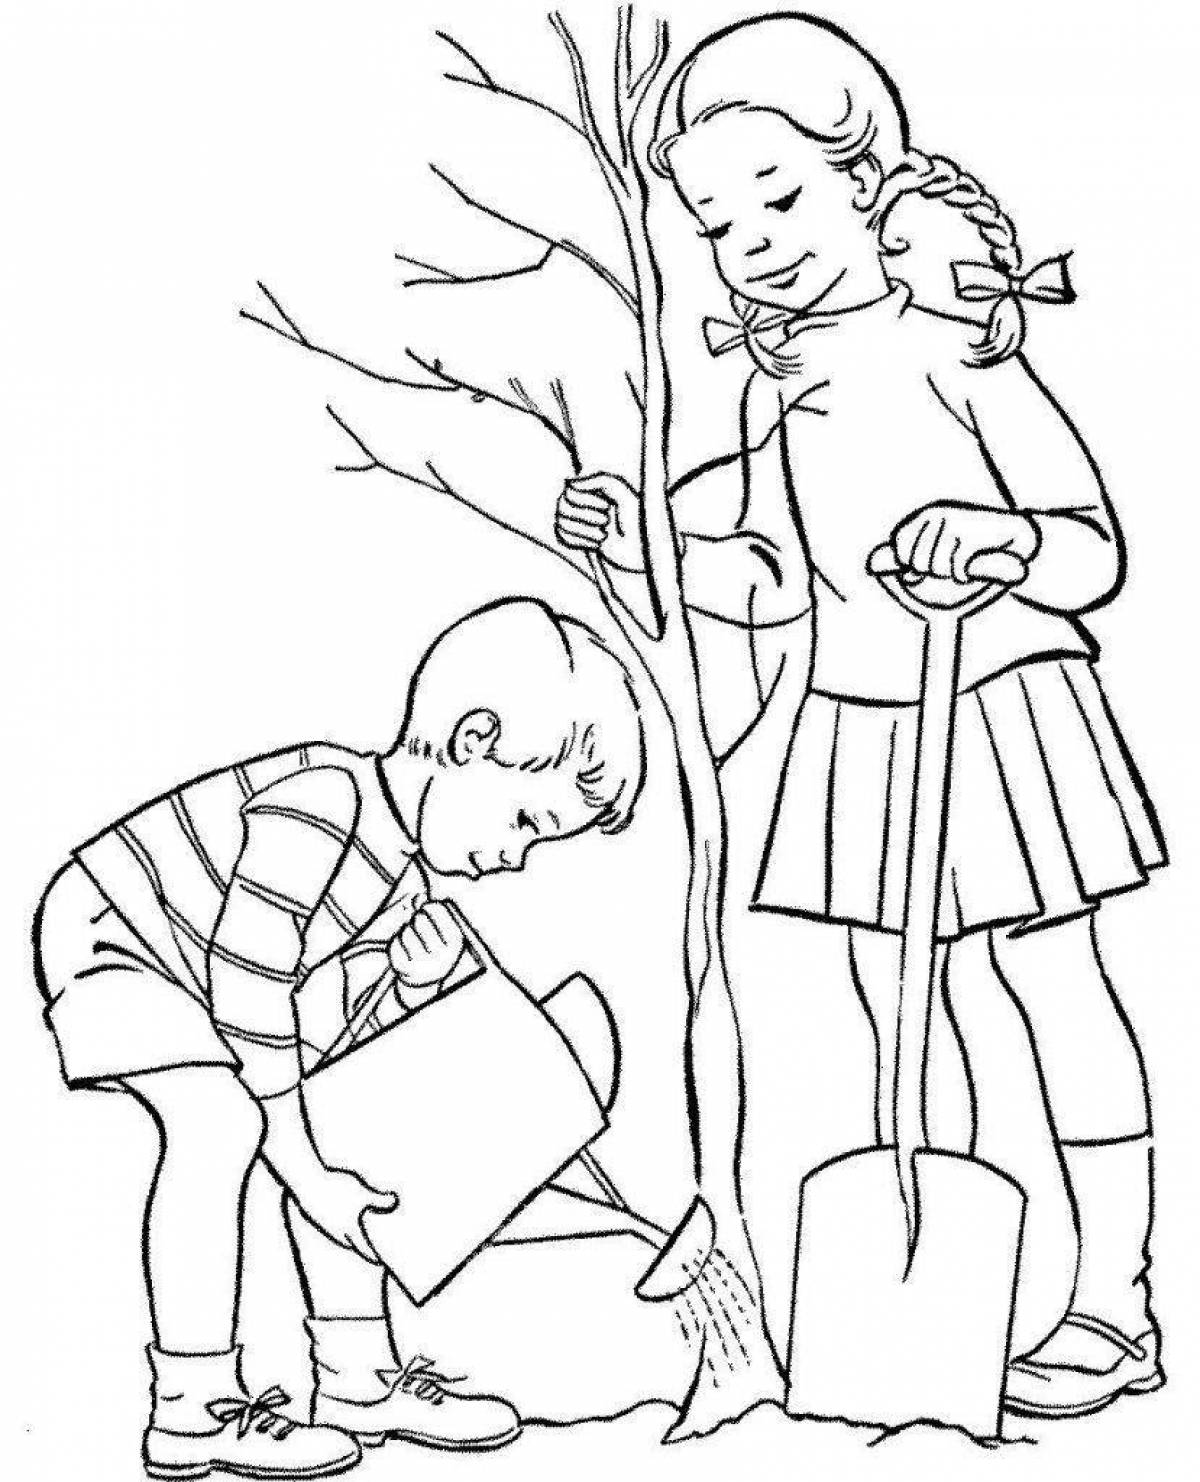 Shining good deeds coloring page